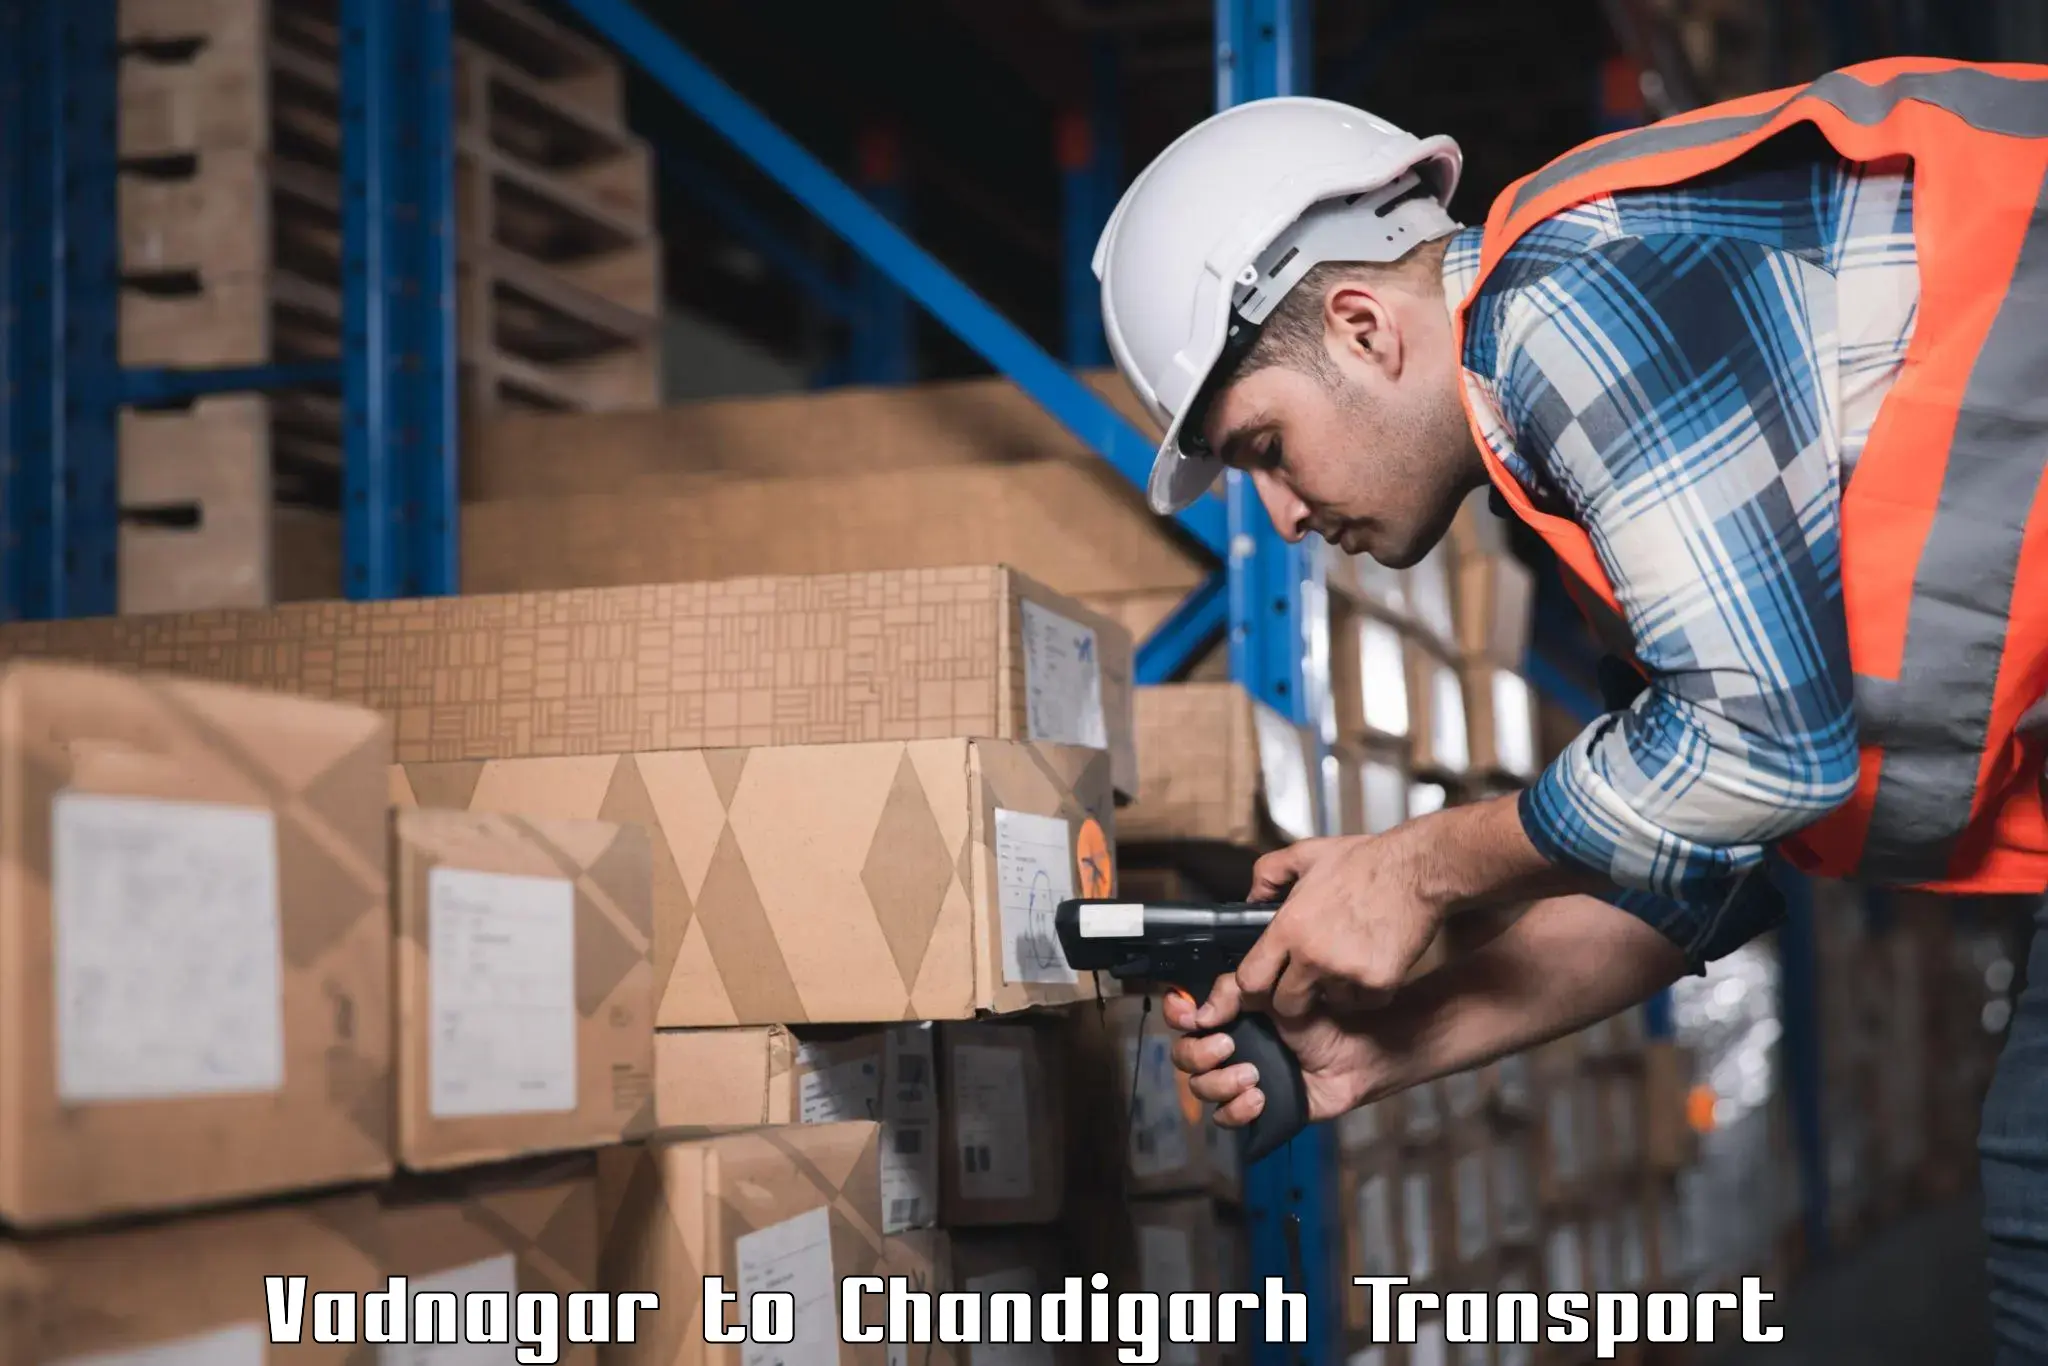 Transport bike from one state to another Vadnagar to Chandigarh